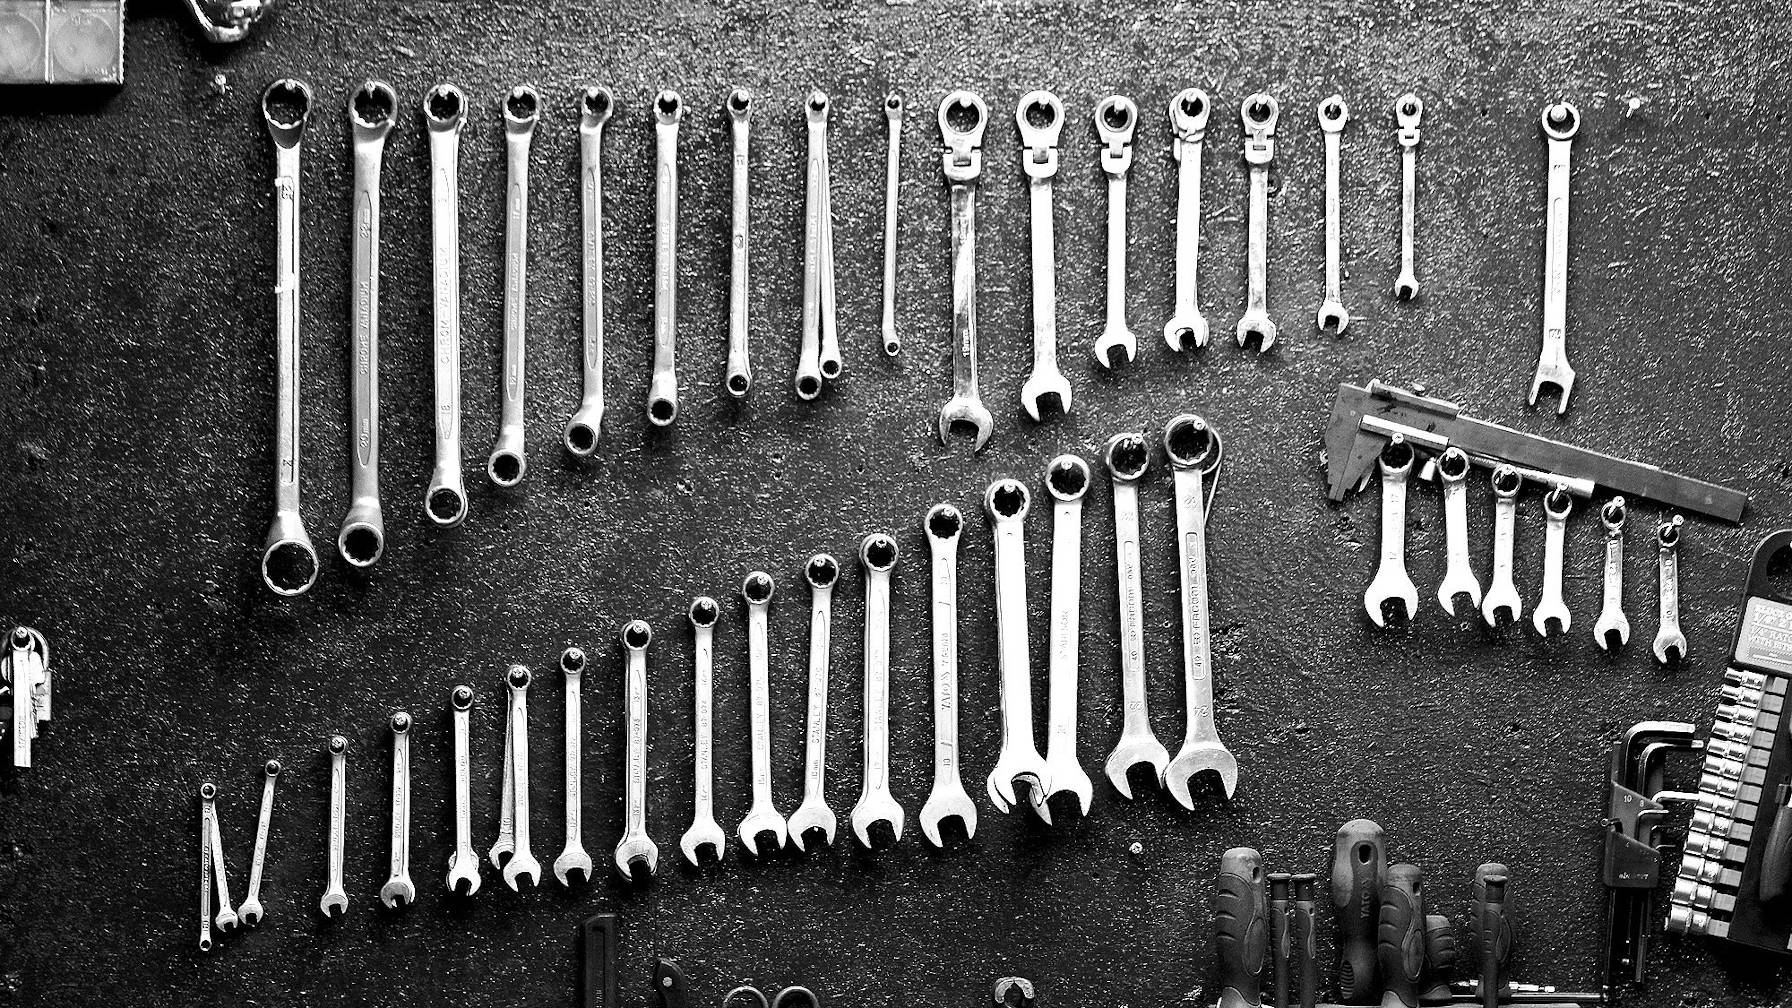 Decorative image of a set of tools, primarily wrenches, neatly aligned.